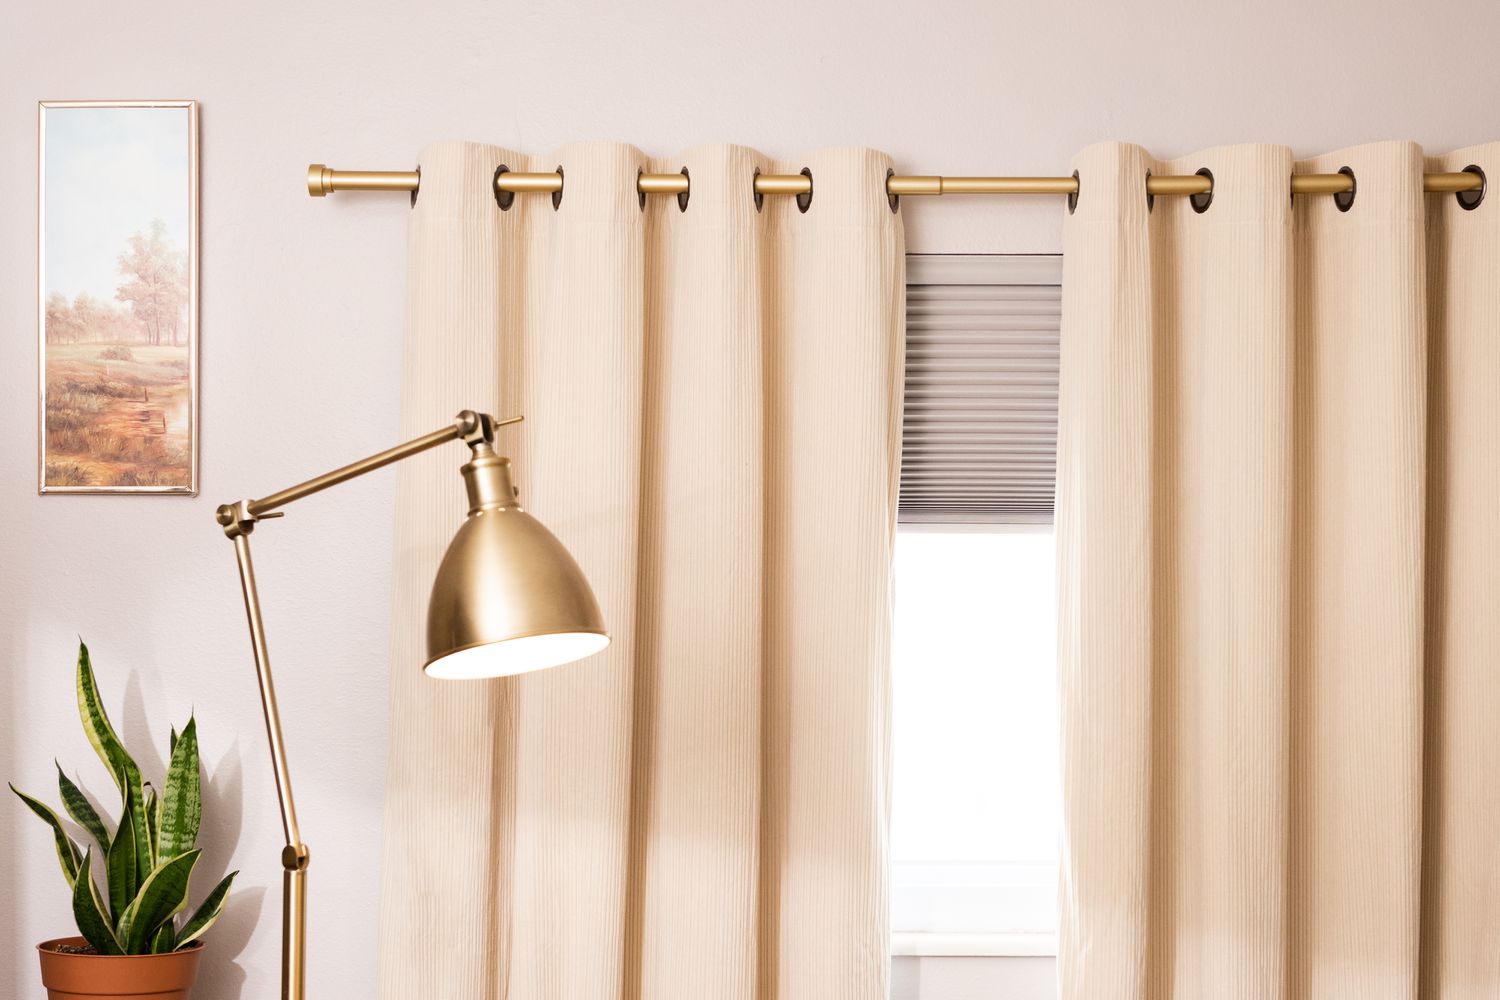 How To Install Curtain Rods: Easy Steps For Success